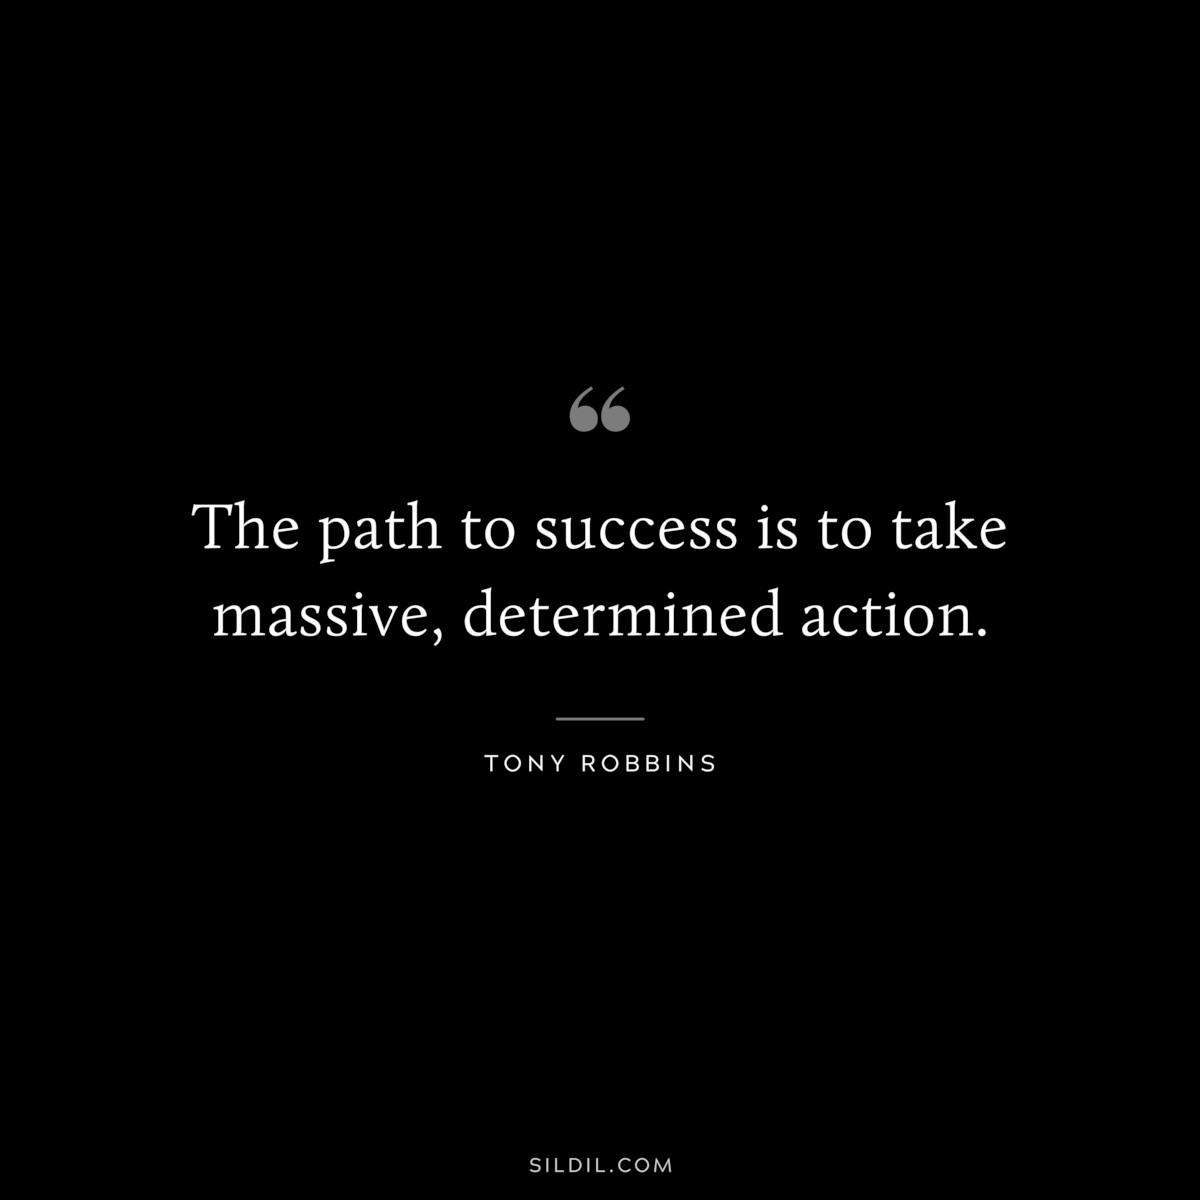 The path to success is to take massive, determined action. ― Tony Robbins